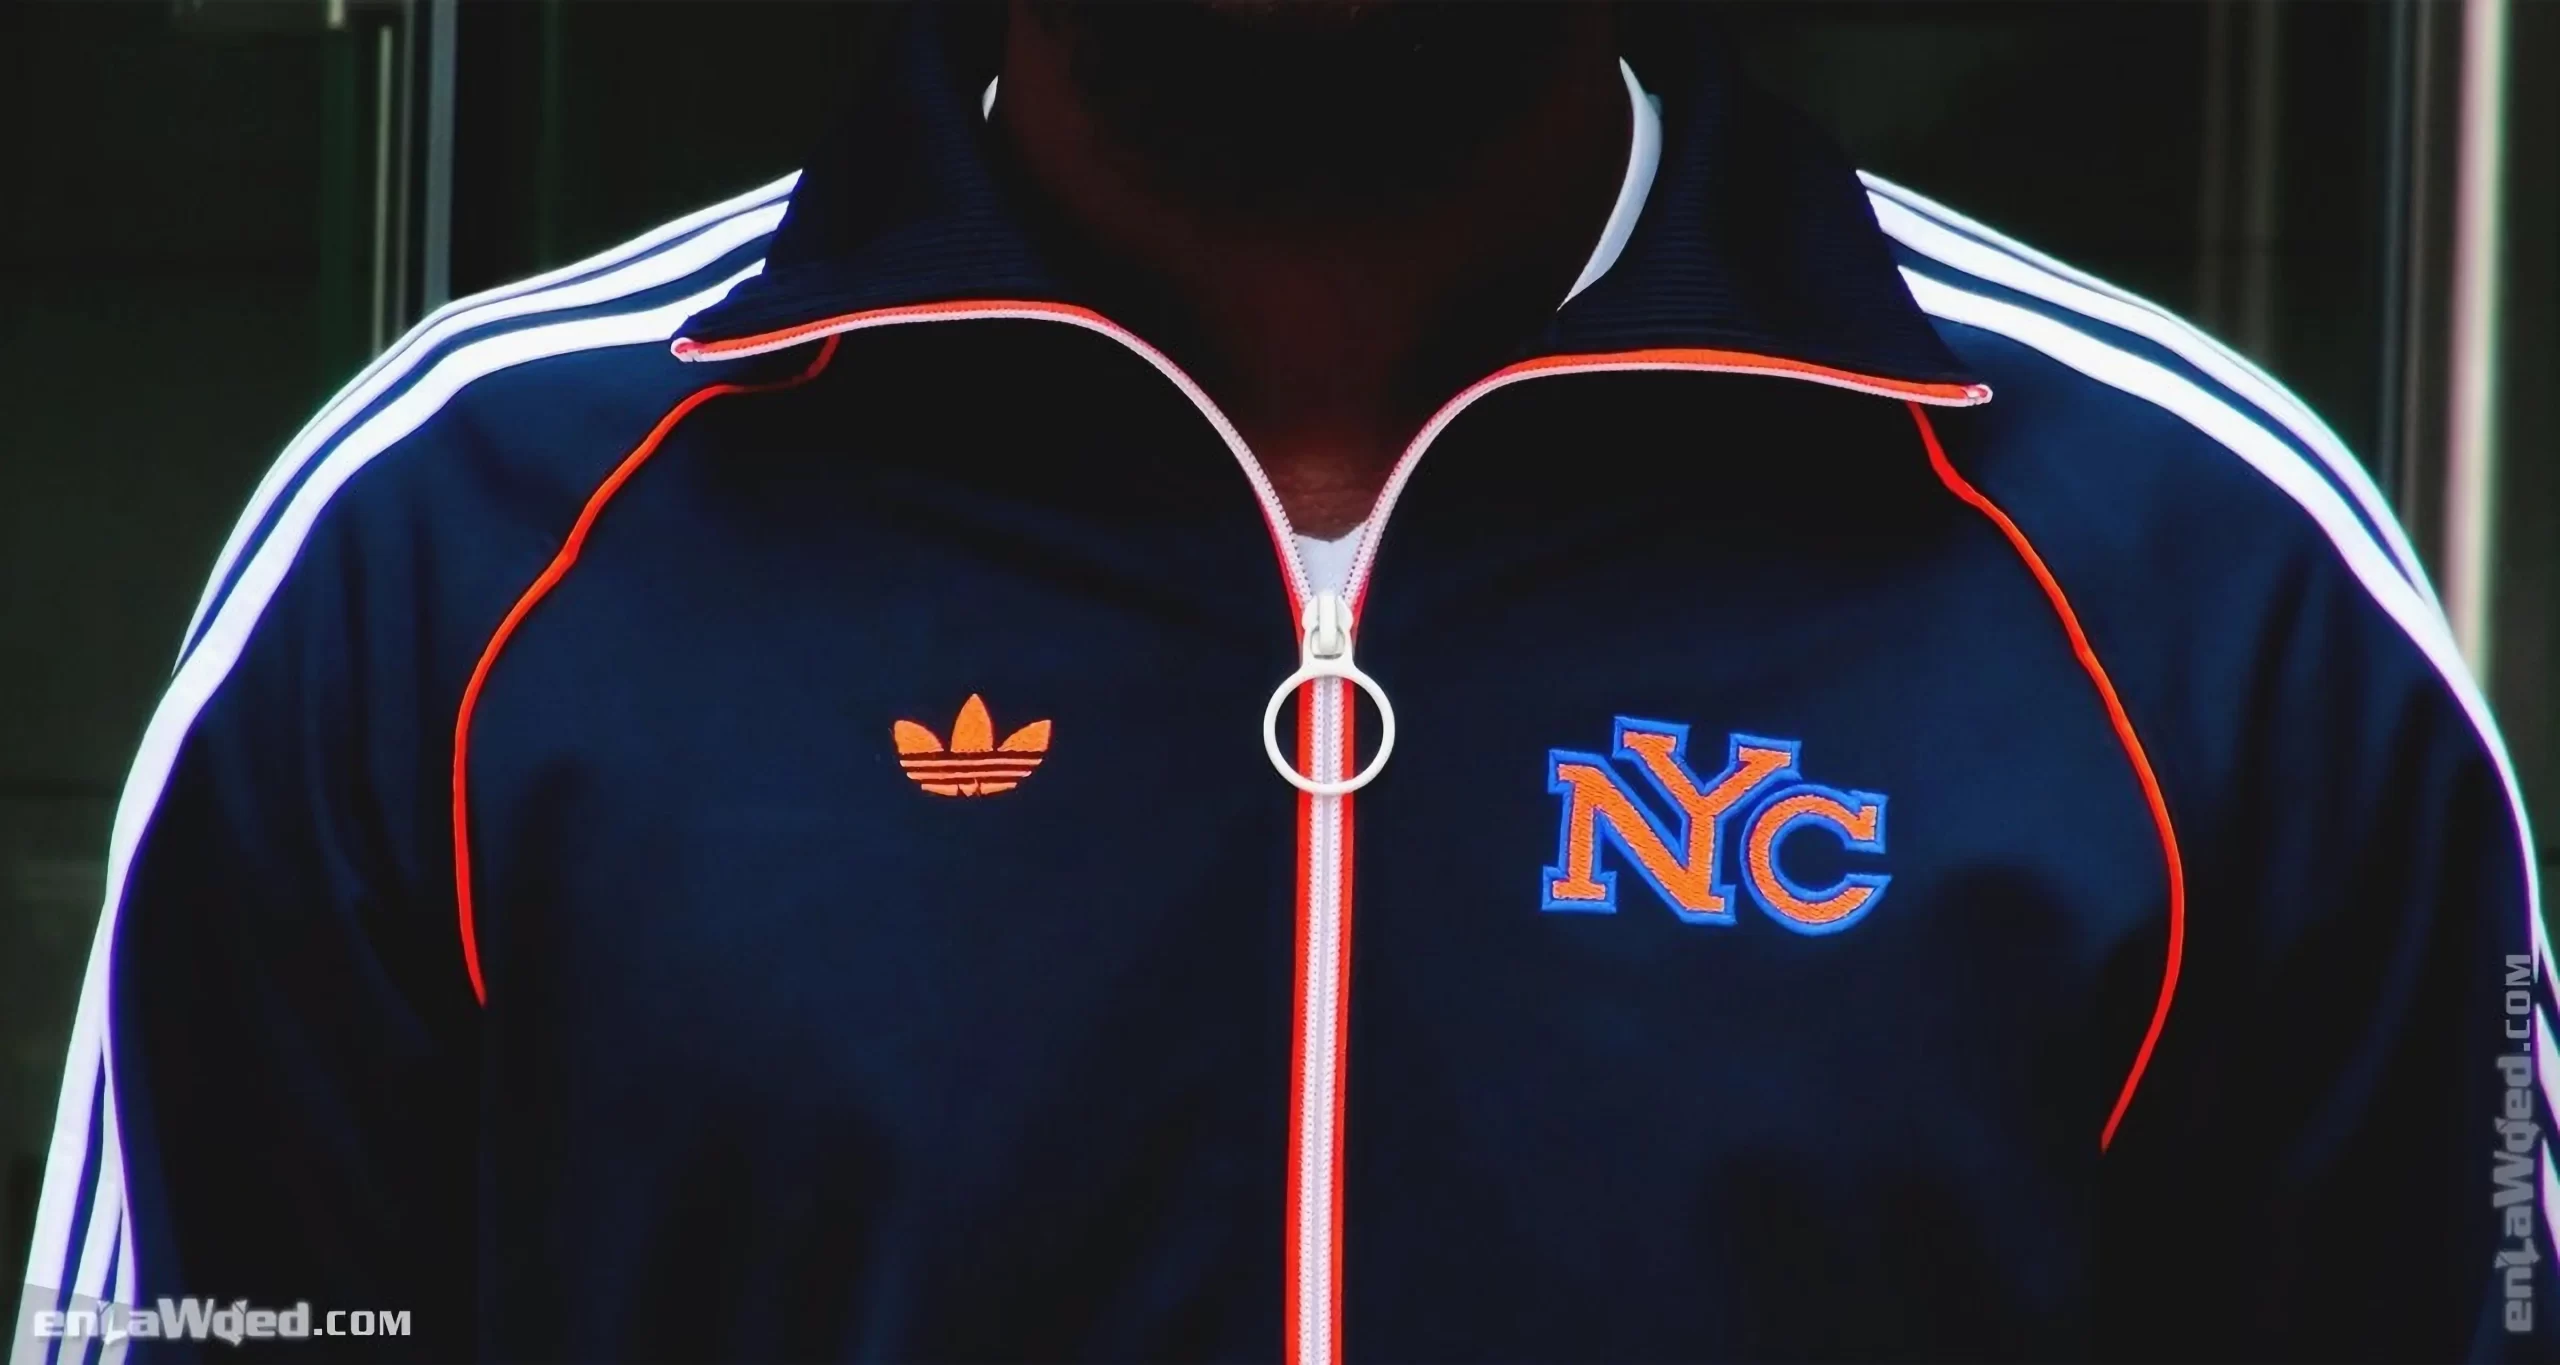 Men’s 2006 New York City Track Top by Adidas Originals: Backed (EnLawded.com file #lmchk90415ip2y123179kg9st)